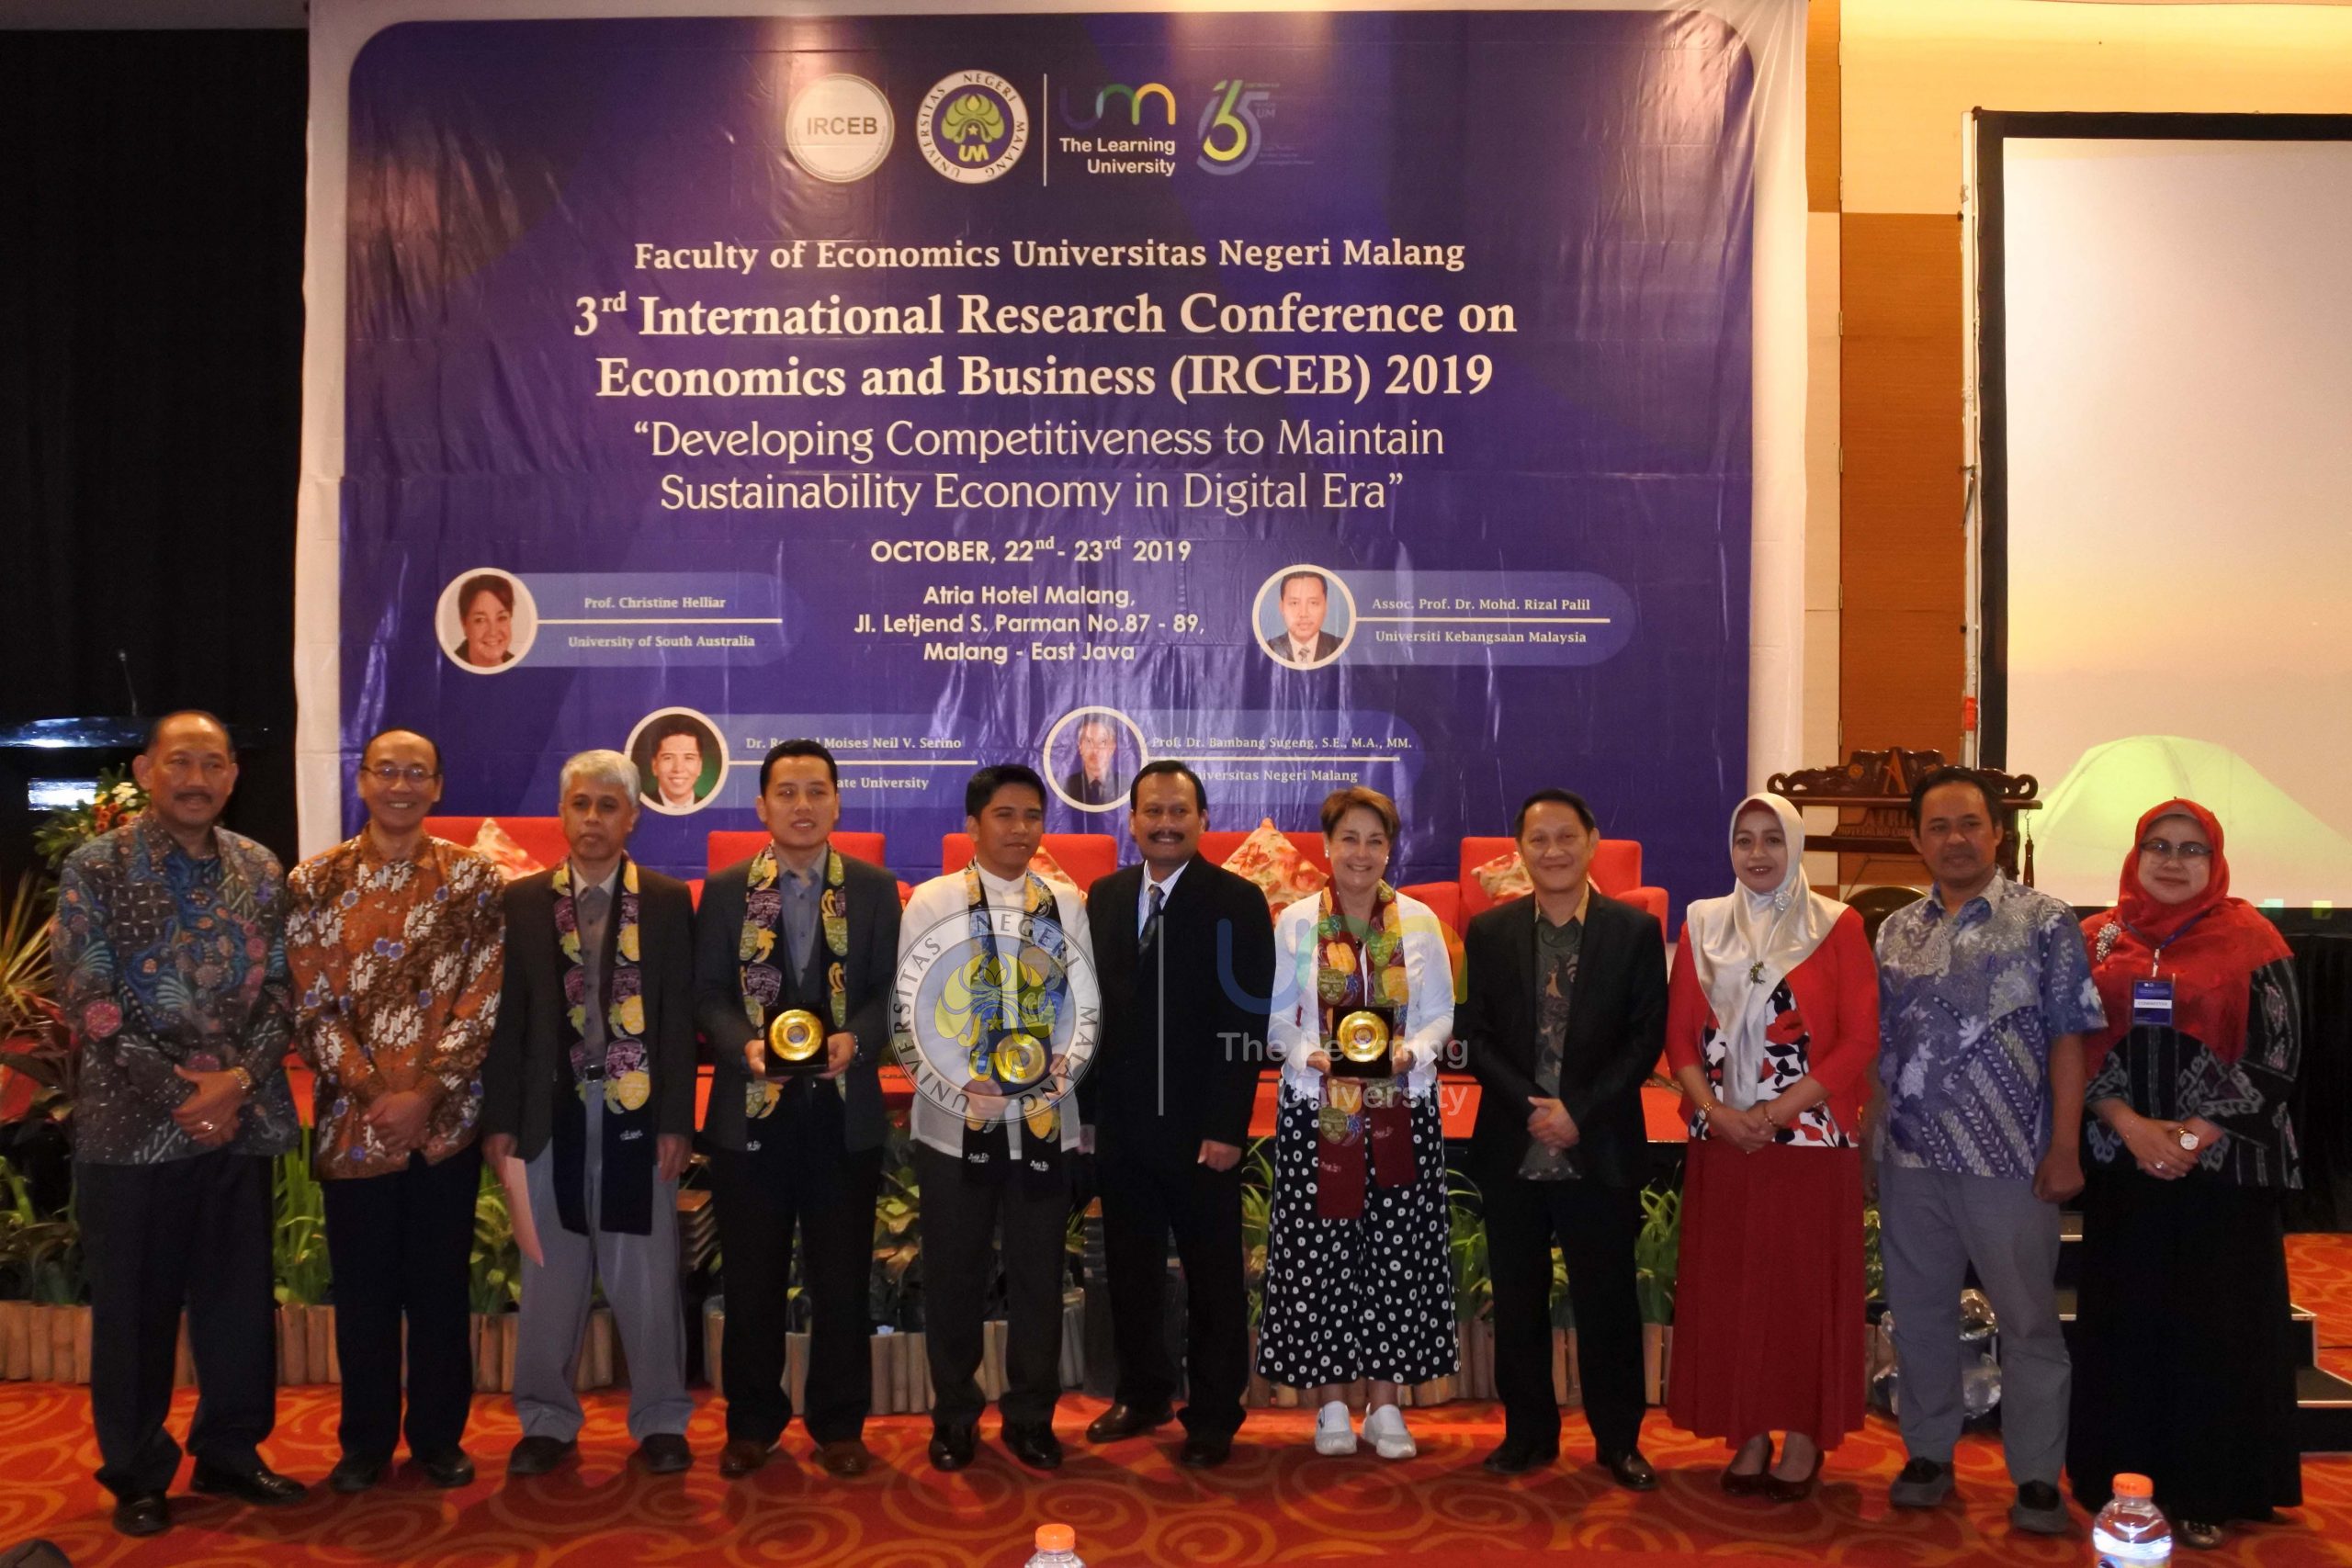 3rd International Research Conference on Economics and Business (IRCEB)